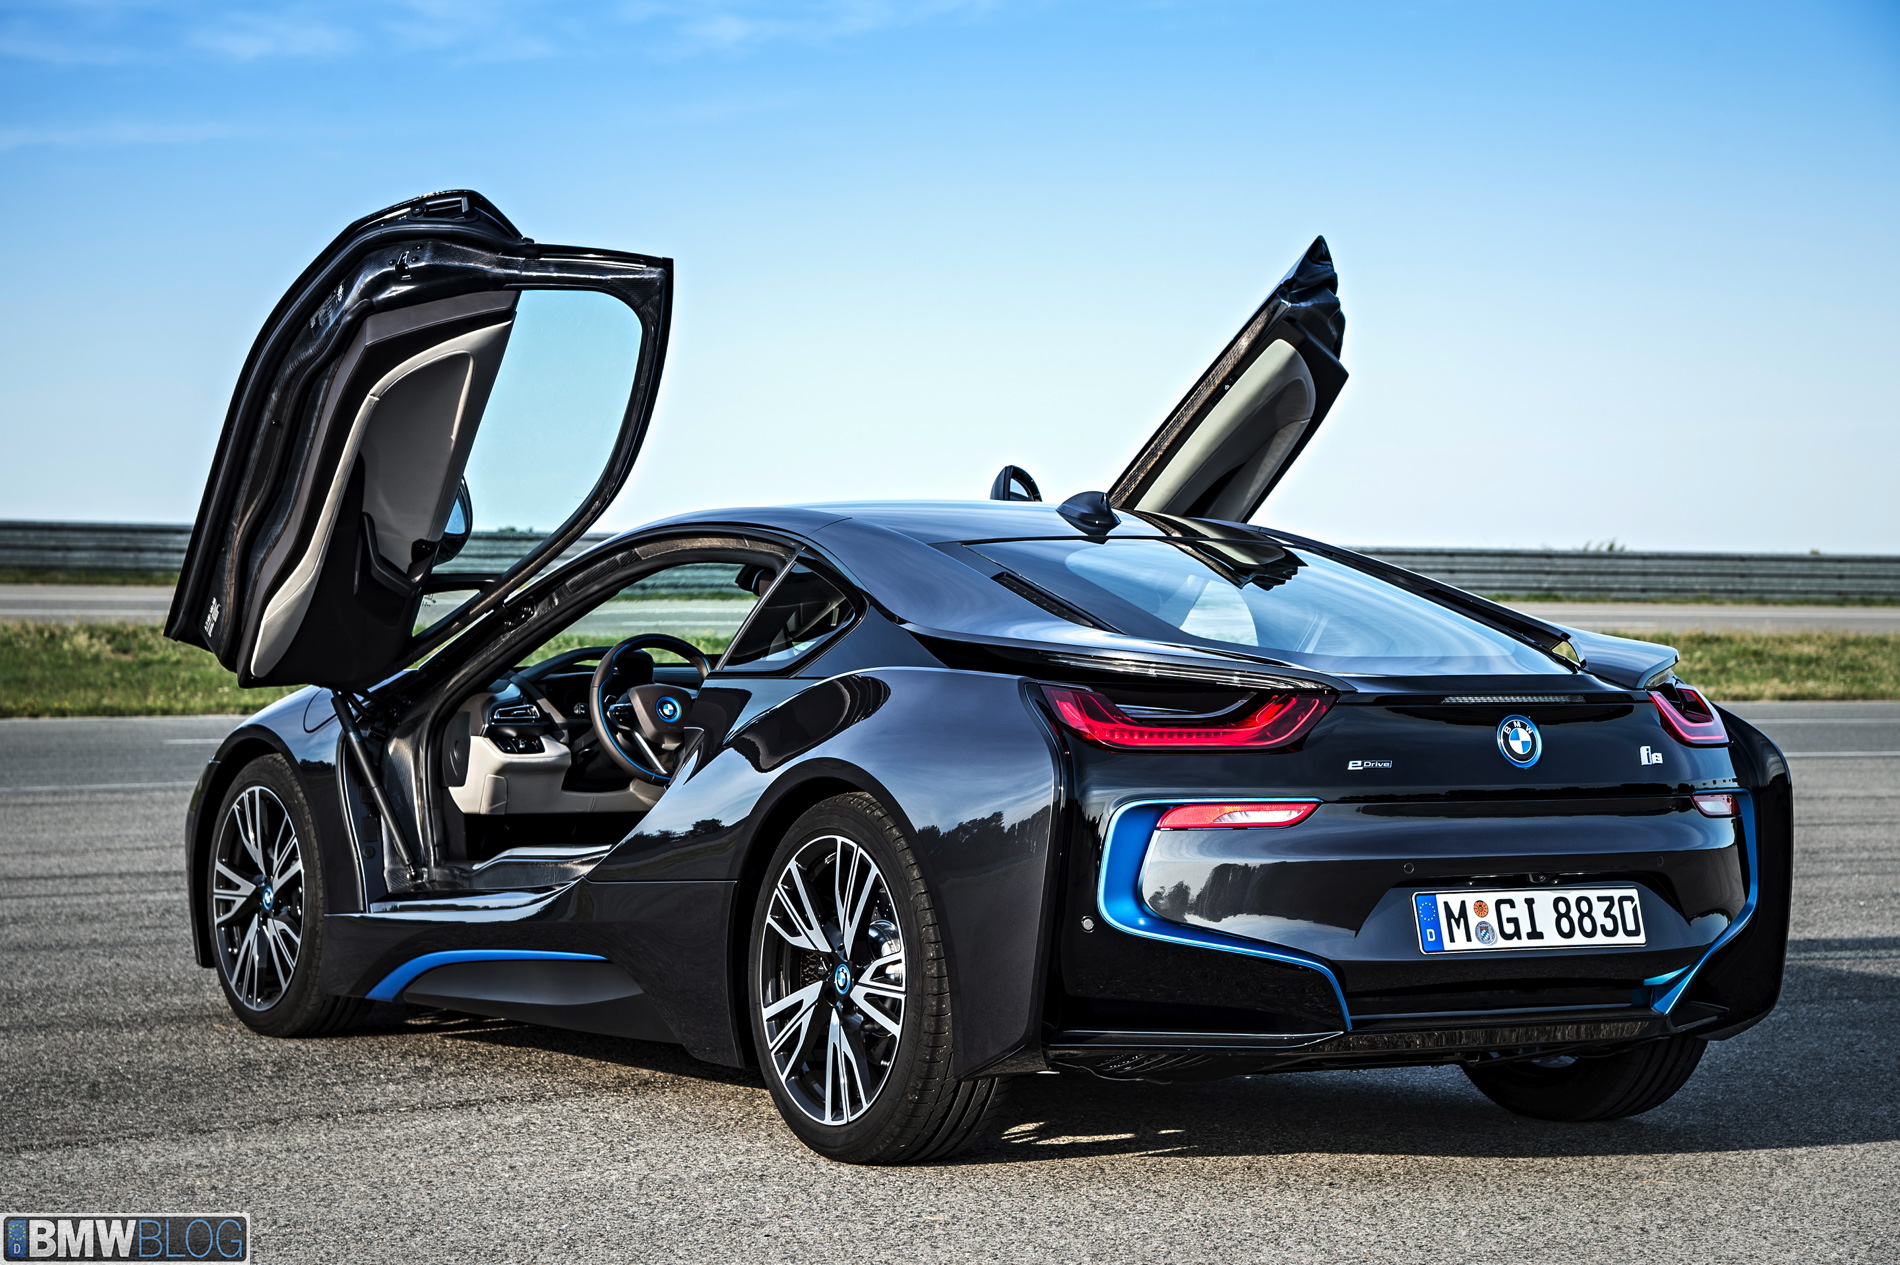 2014 bmw i8 wallpapers 42 750x499 Video: BMW i8 in detail. Performance